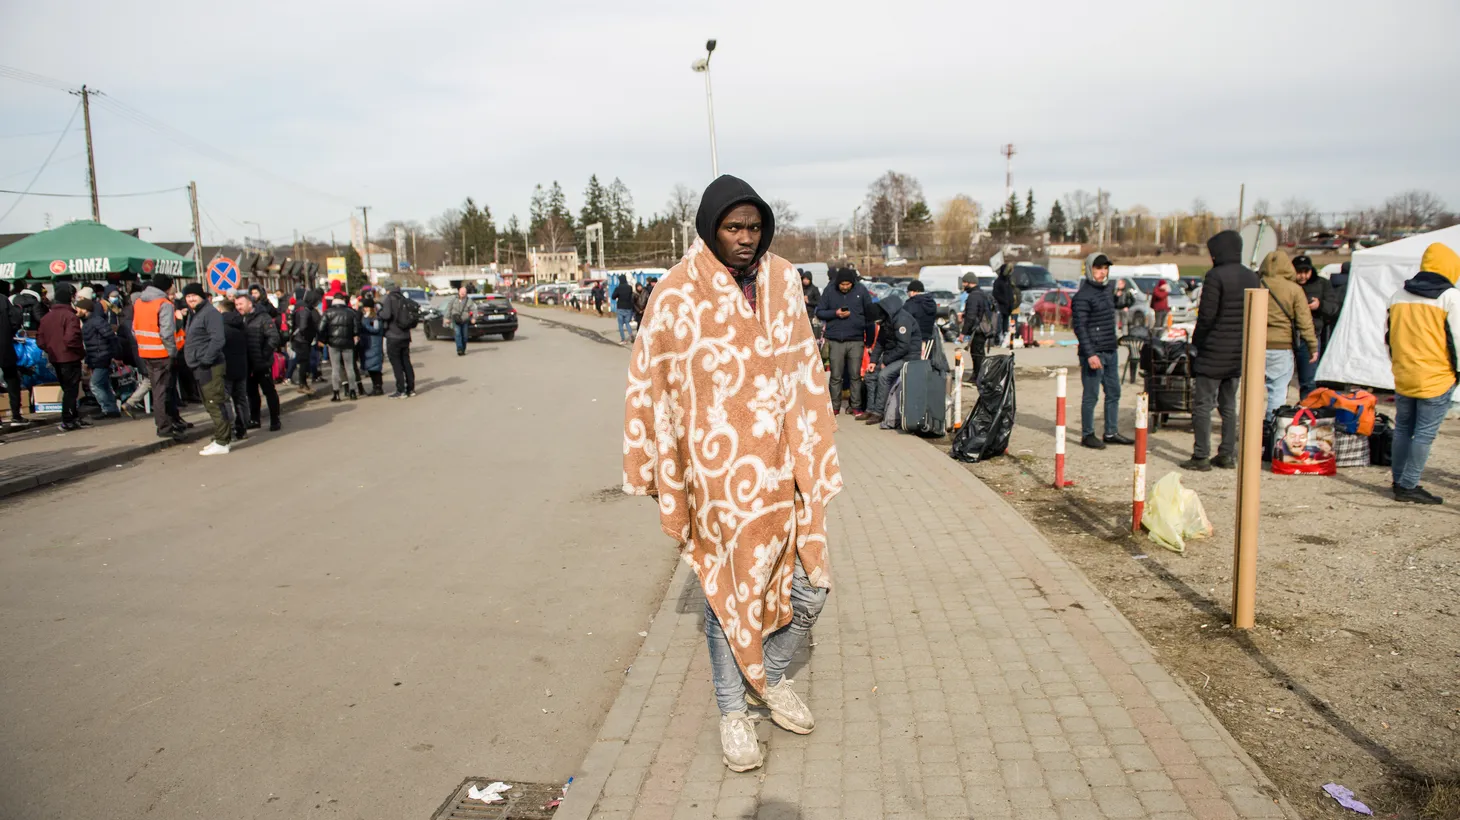 An African man covering himself in a blanket is seen at the border of Ukraine and Poland. In southeastern Poland, hundreds of non-Ukrainians are sheltering. People fleeing the war in Ukraine for the safety of European border towns include citizens of African, Asian and Middle East countries.